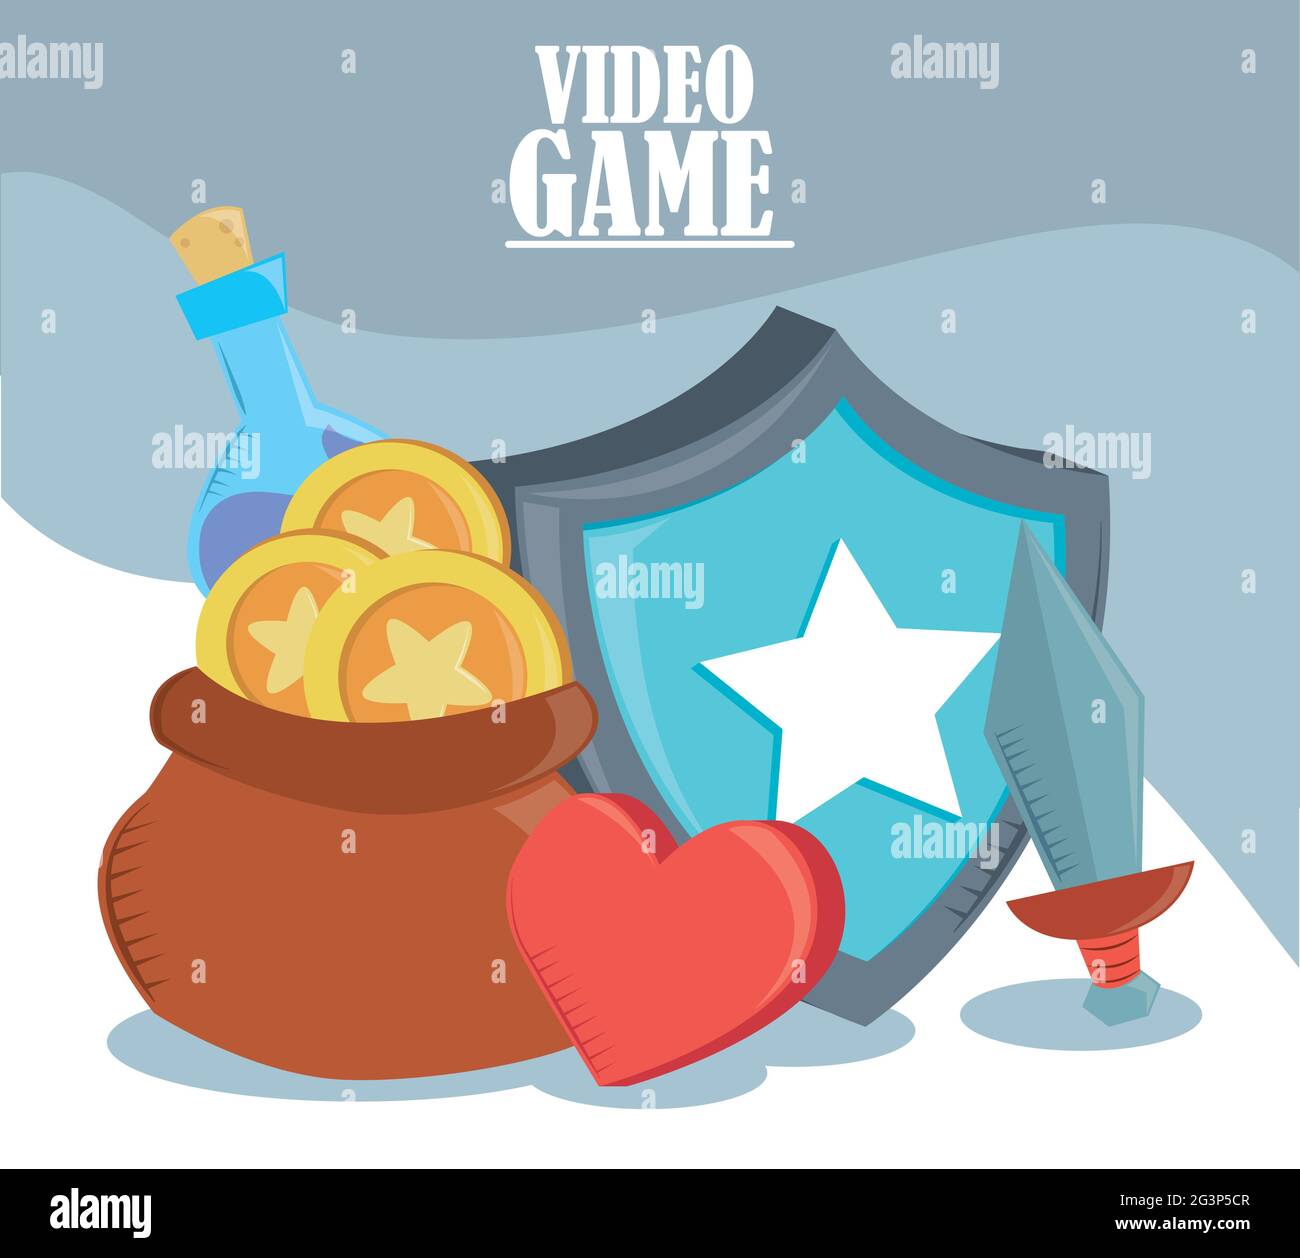 video game card Stock Vector